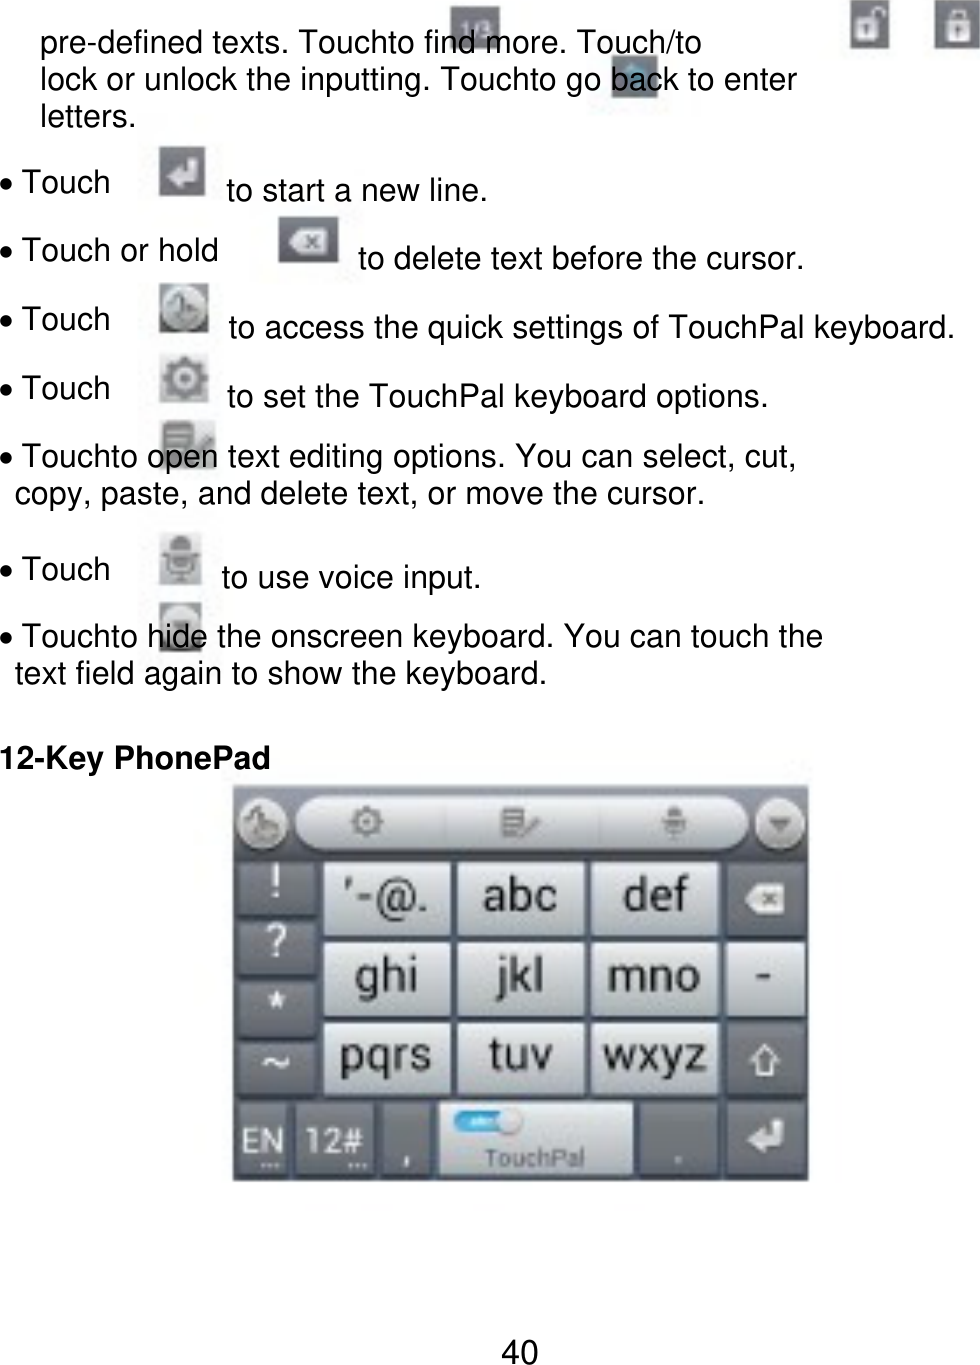 pre-defined texts. Touchto find more. Touch/to lock or unlock the inputting. Touchto go back to enter letters. Touch to start a new line. to delete text before the cursor. Touch or hold Touch Touch to access the quick settings of TouchPal keyboard. to set the TouchPal keyboard options. Touchto open text editing options. You can select, cut,   copy, paste, and delete text, or move the cursor. Touch to use voice input. Touchto hide the onscreen keyboard. You can touch the   text field again to show the keyboard. 12-Key PhonePad 40 